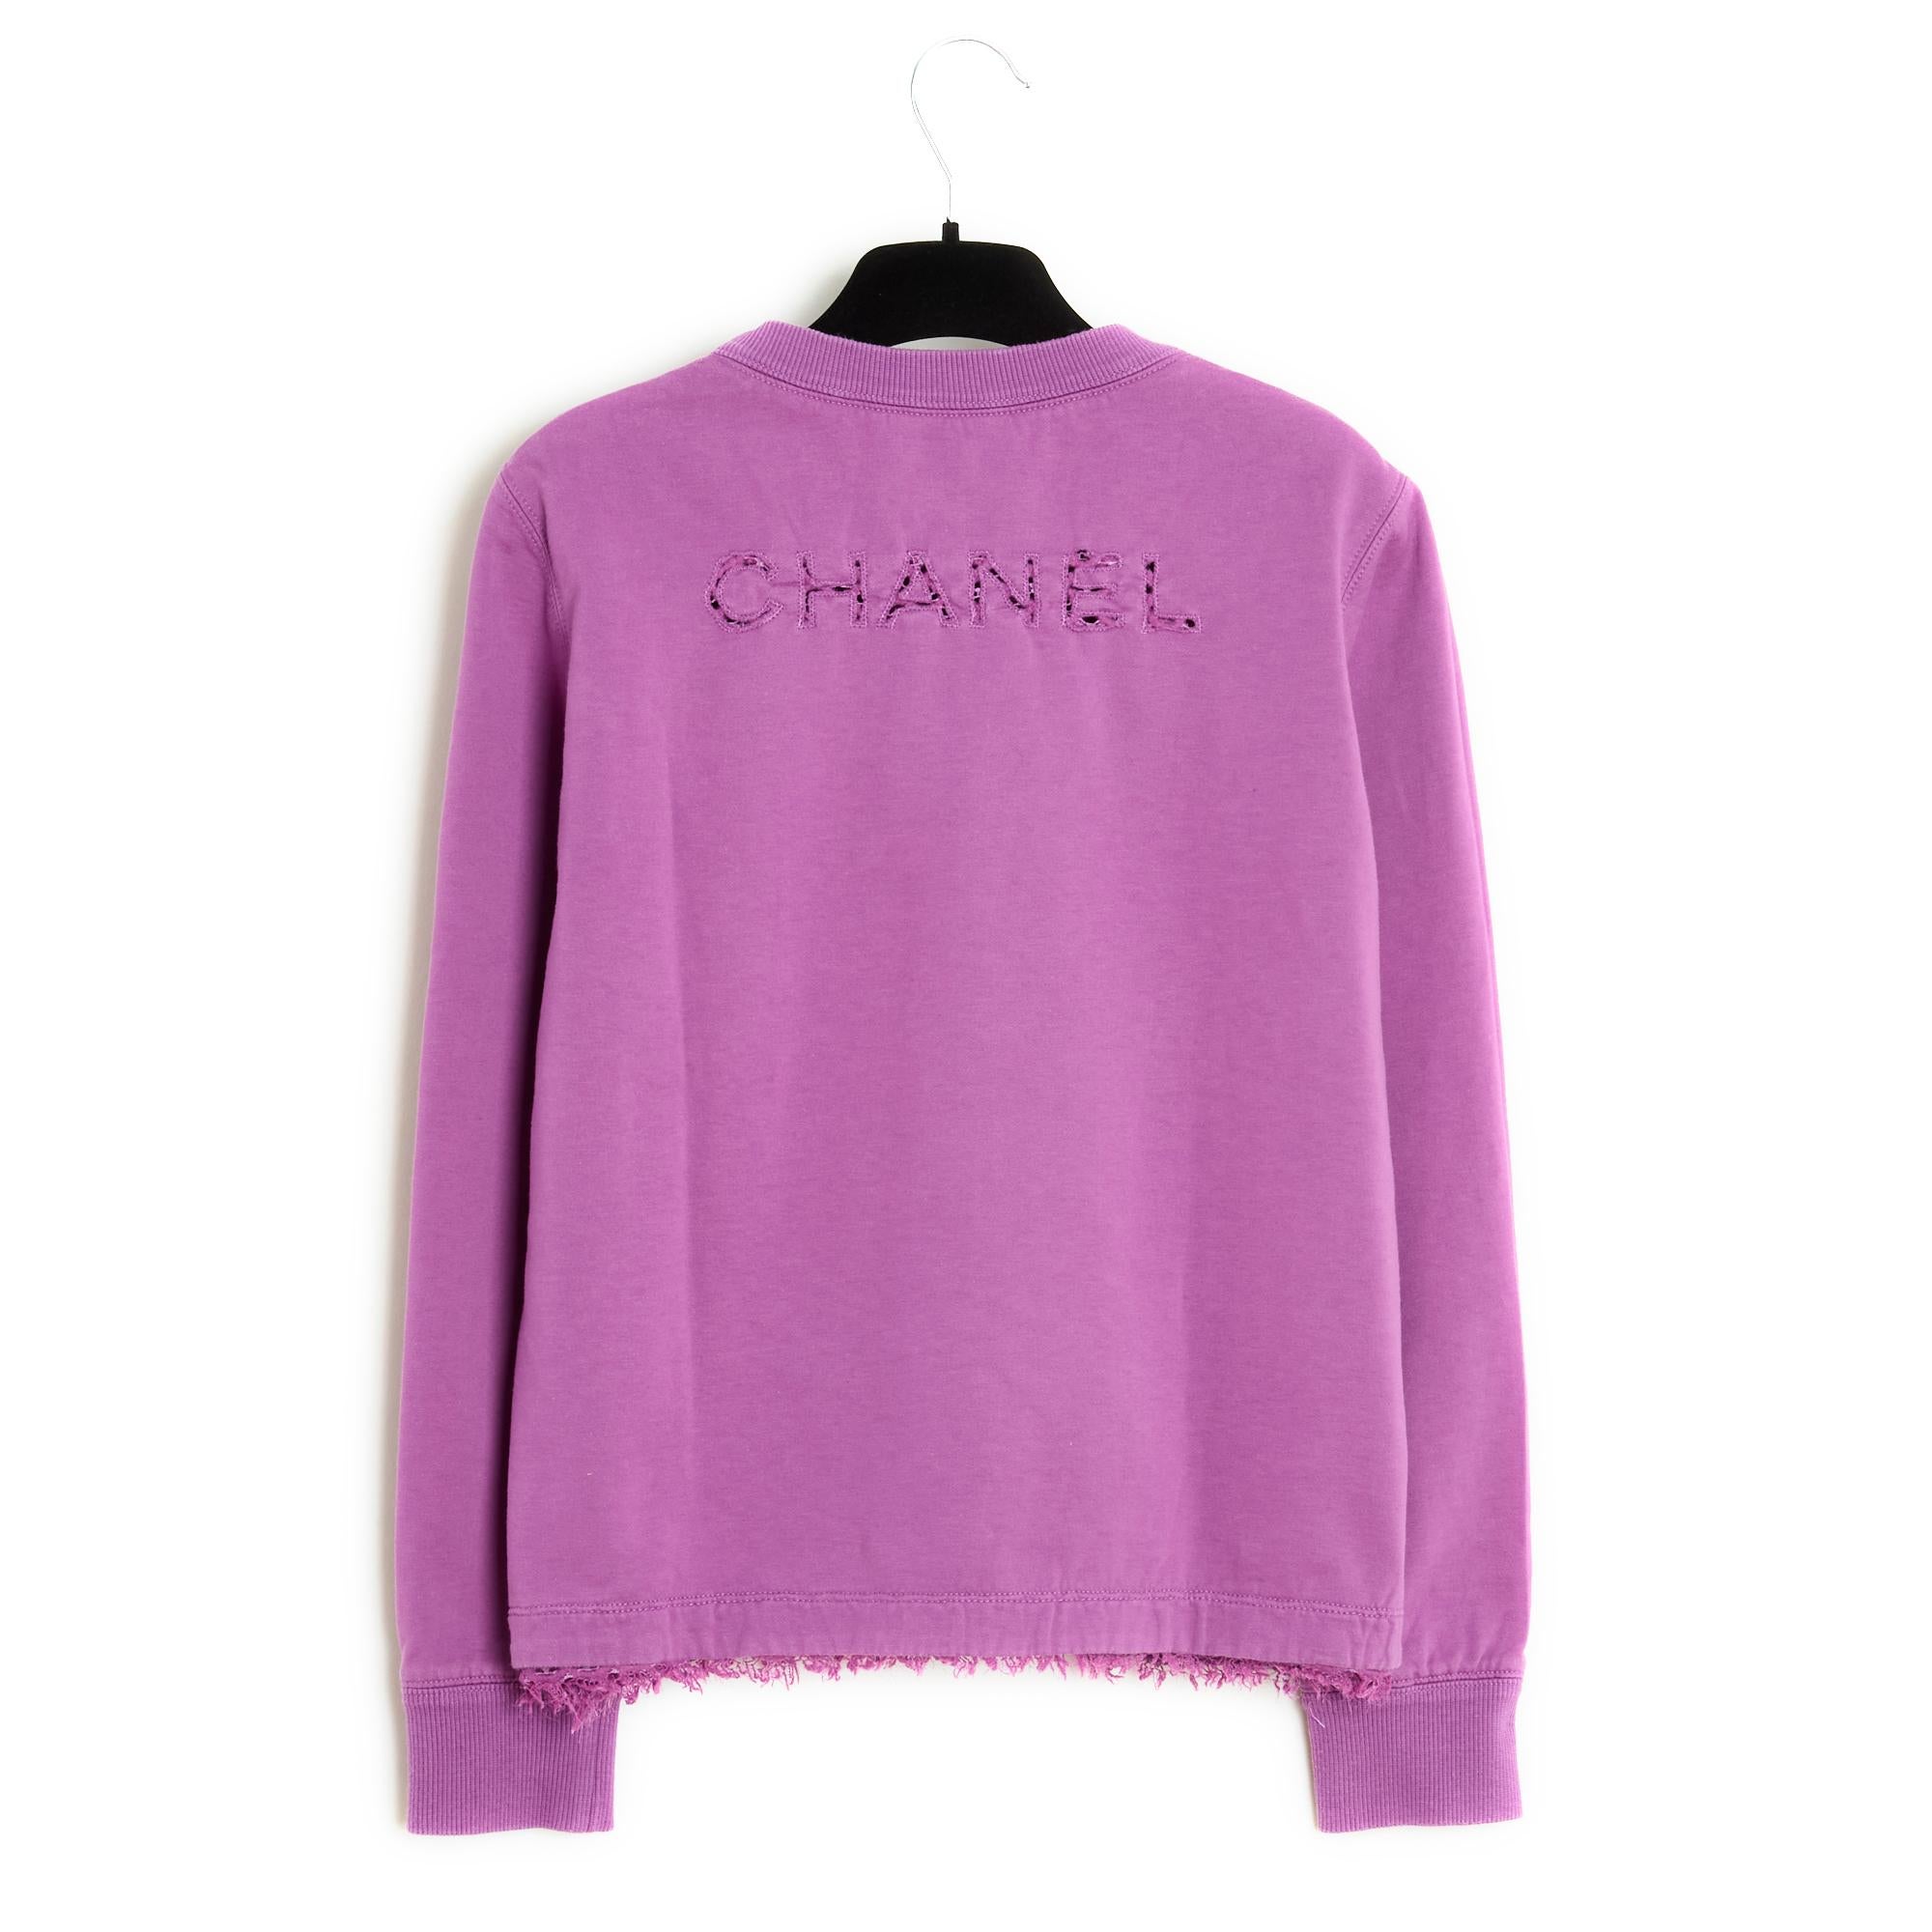 2019 Chanel Top Embroidered Clover Sweatshirt FR34/36 For Sale 1